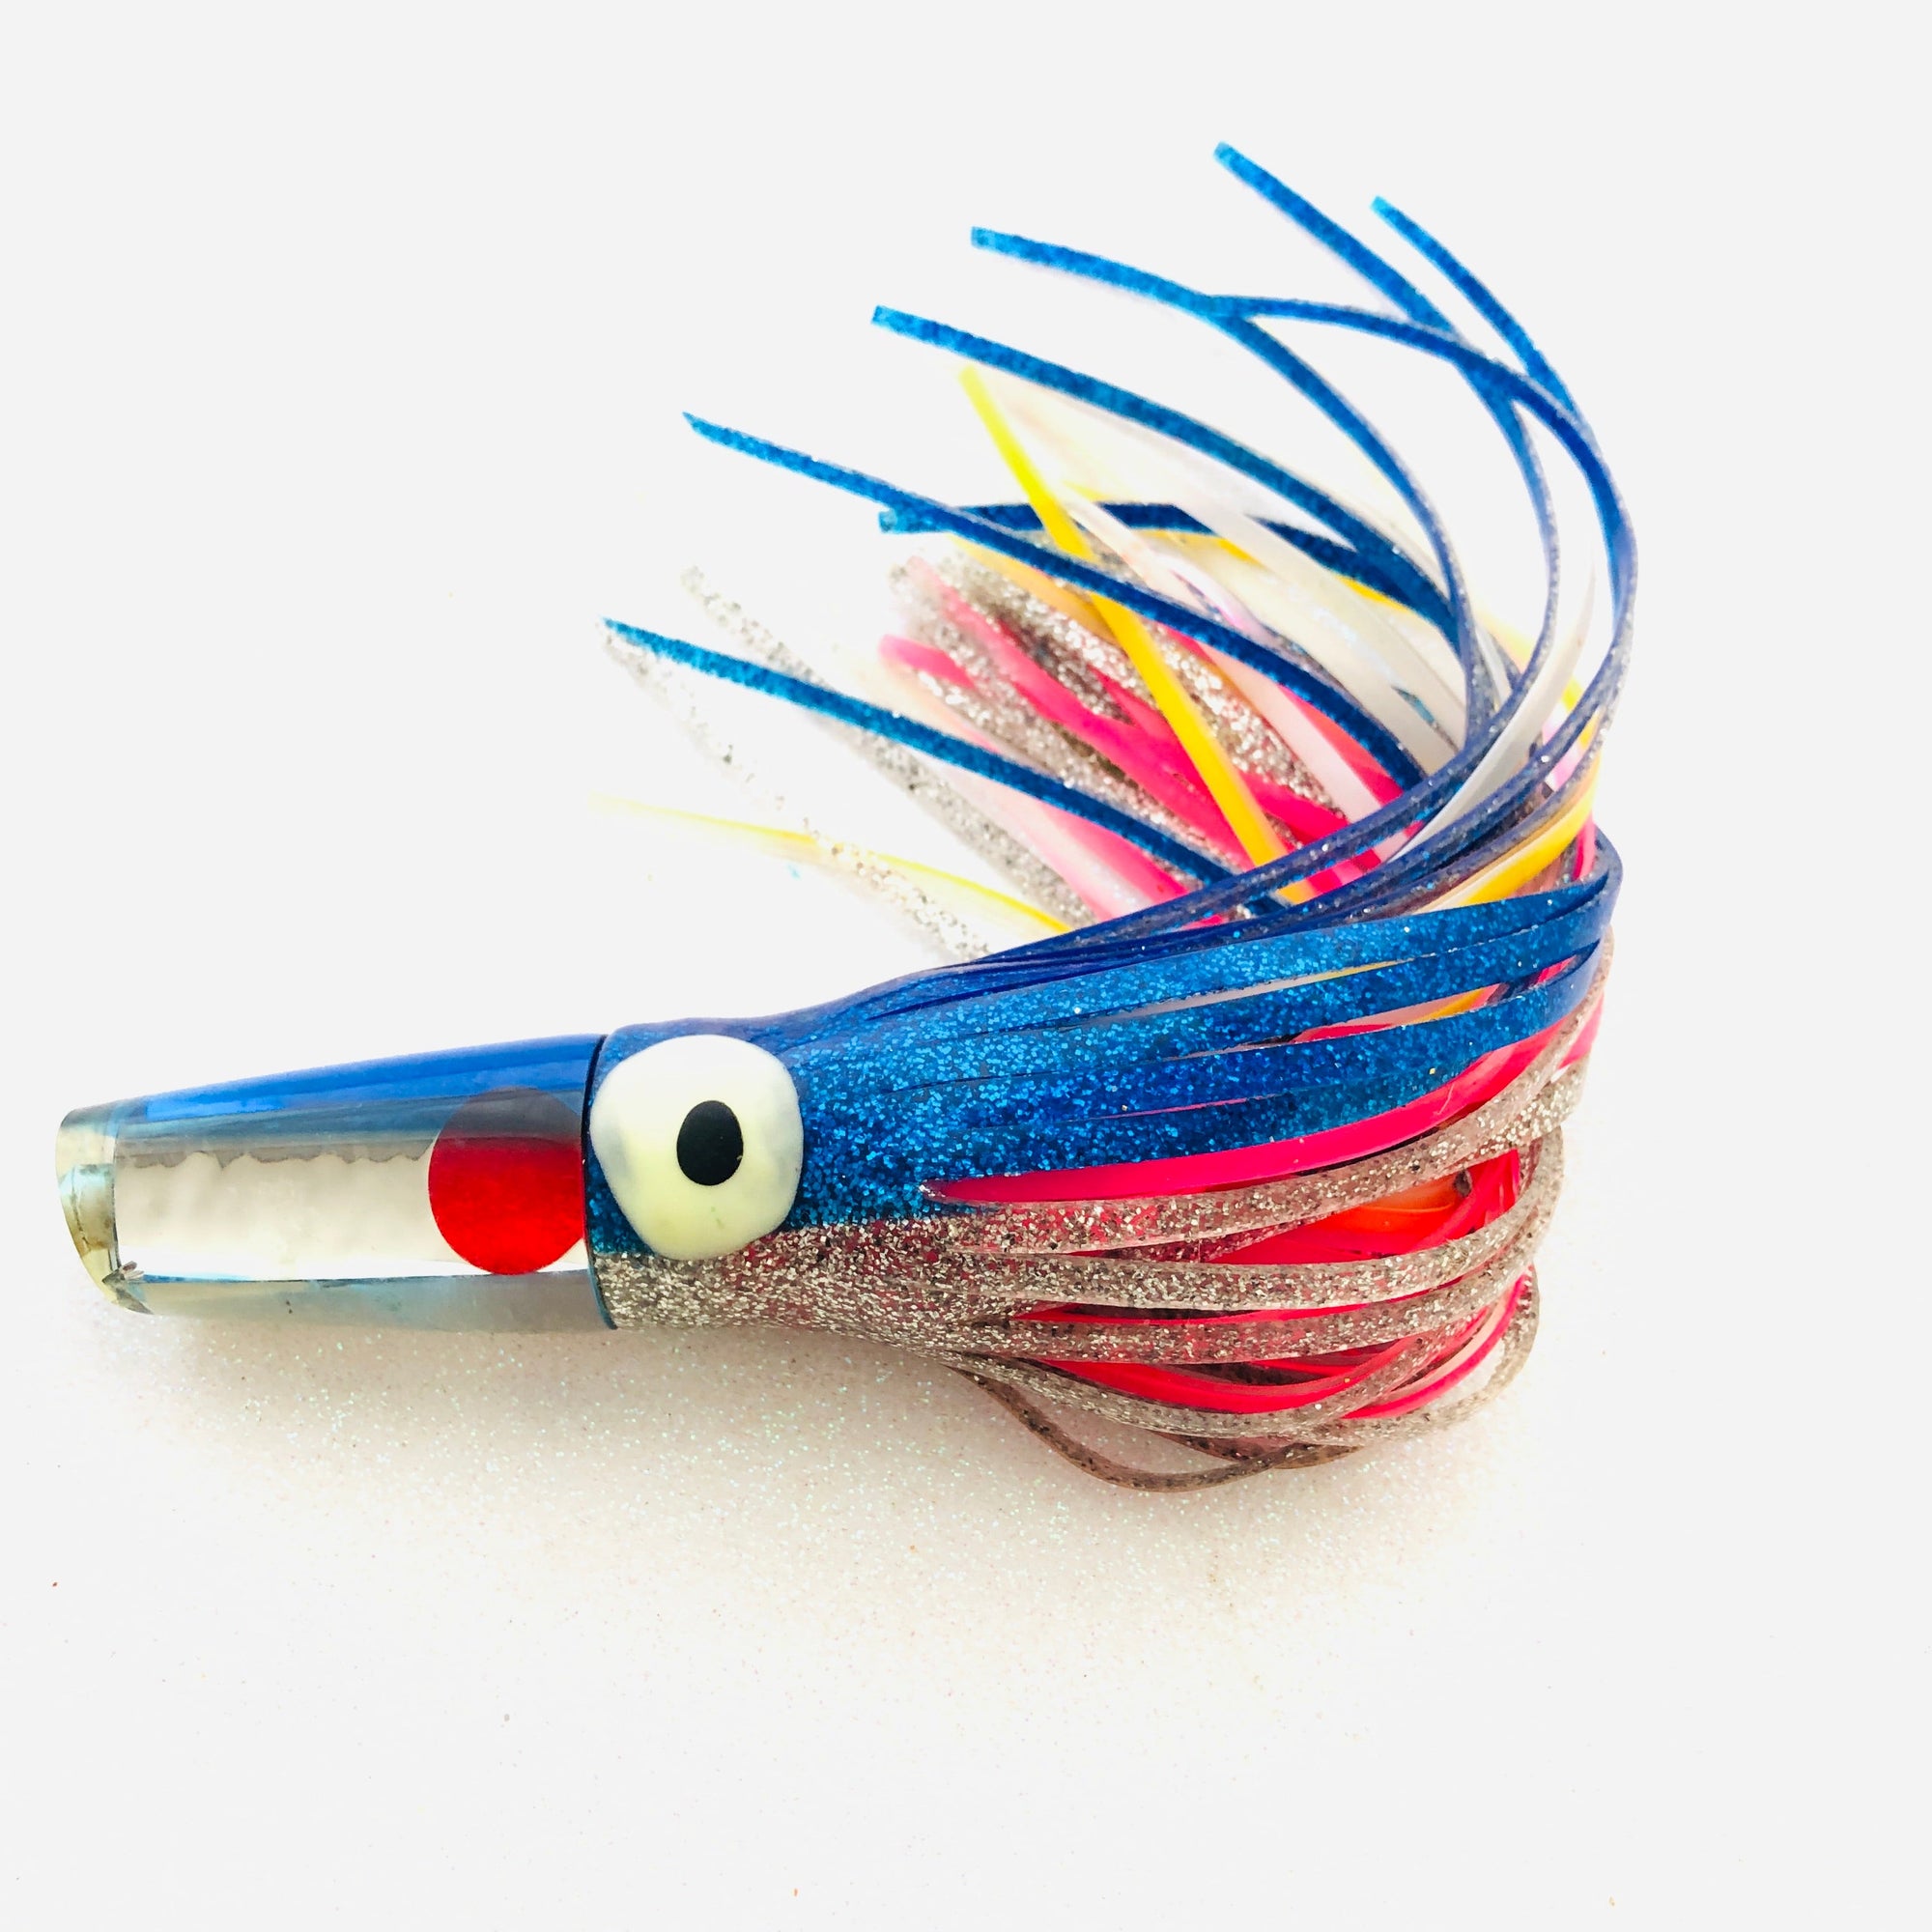 Maker Unknown-Calling all Ahi Slayers! Don't Let This One Get Awayy-Used Lures